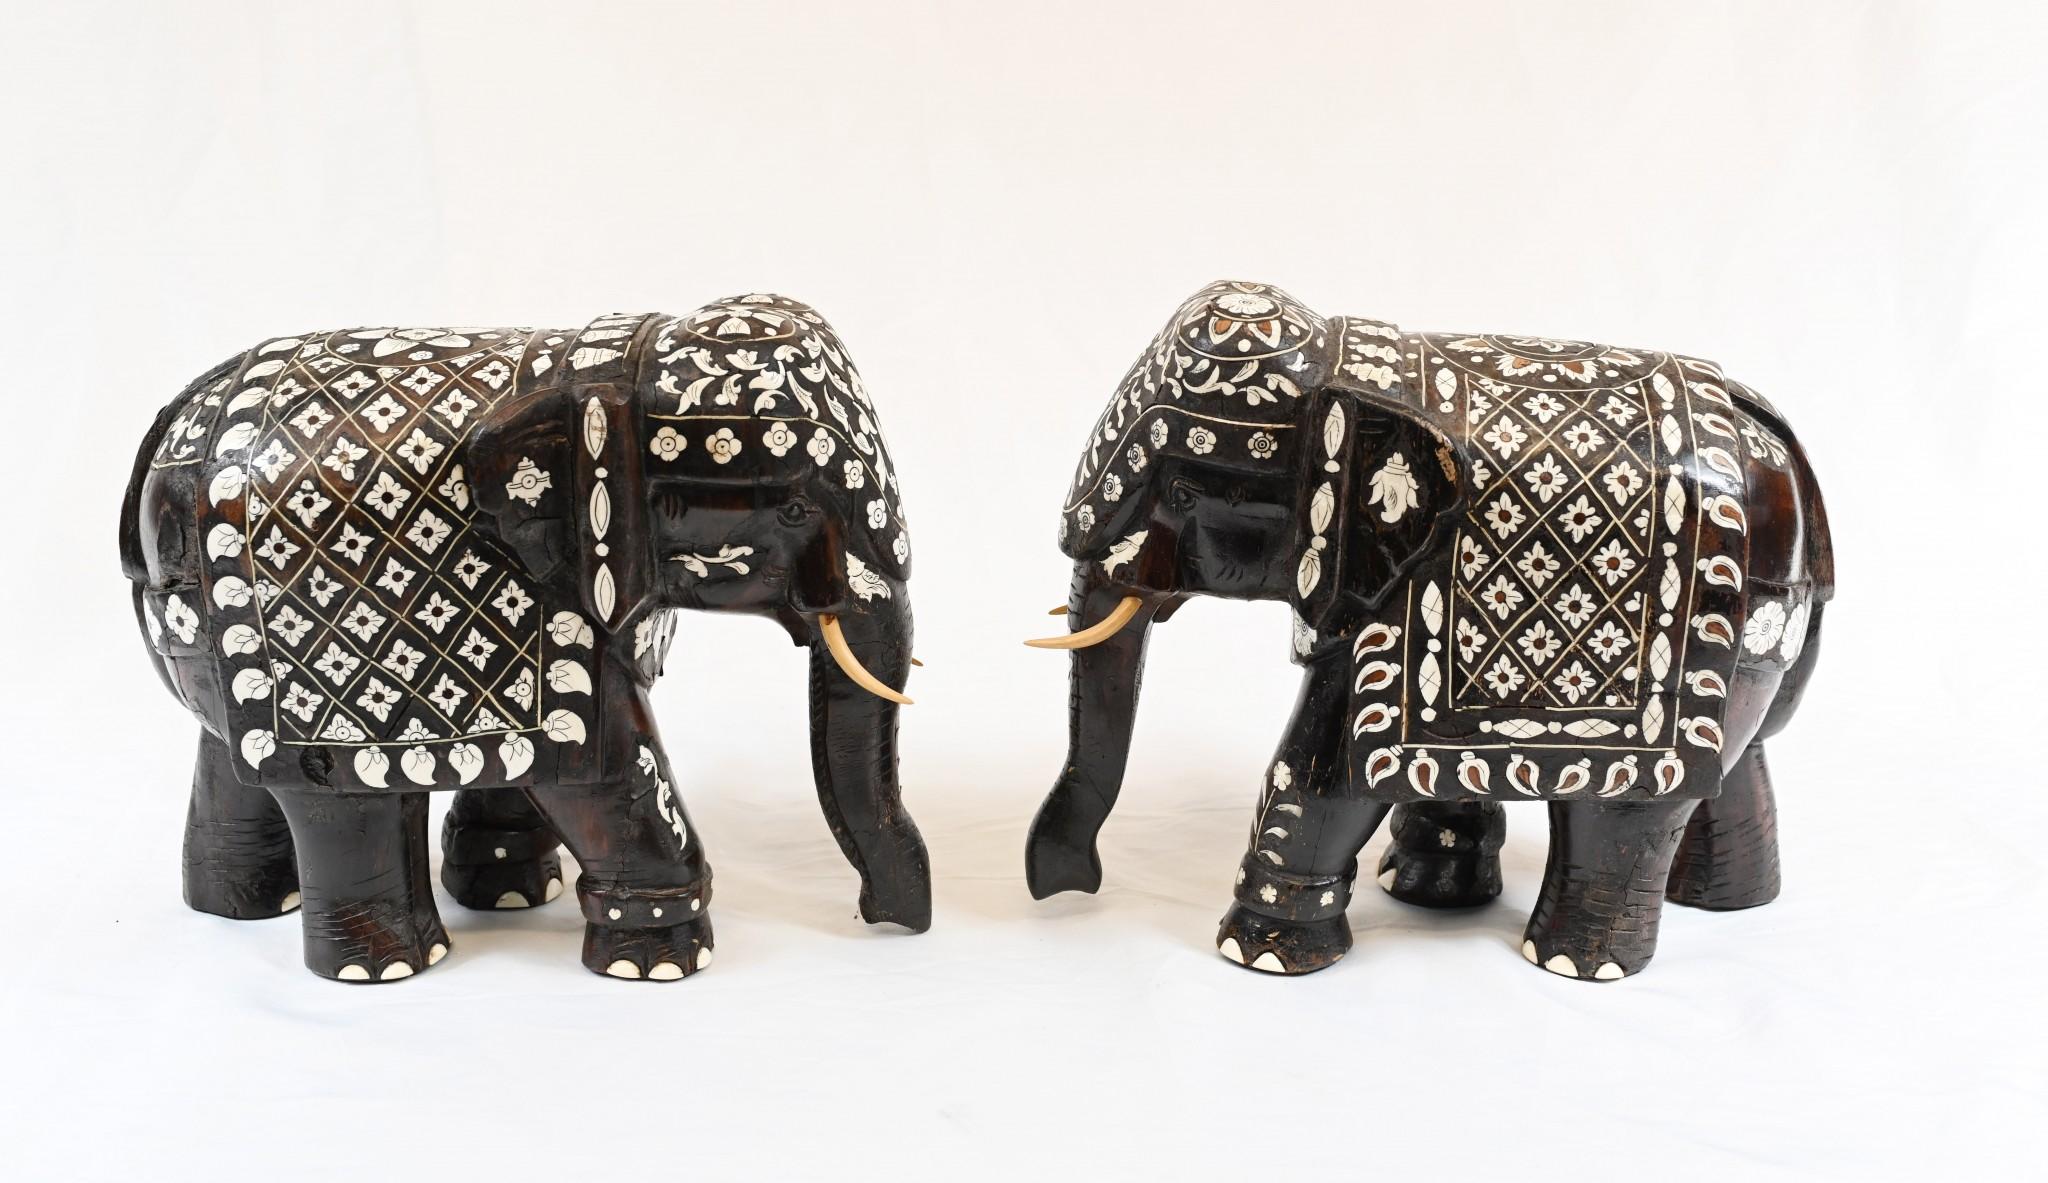 Pair of indian/ goanese hardwood ebony elephants with bone inlays and painted faux tusks circa 1880
Inlay work very detailed and intricate
Great collectable pair of carved elephants 
Some of our items are in storage so please check ahead of a